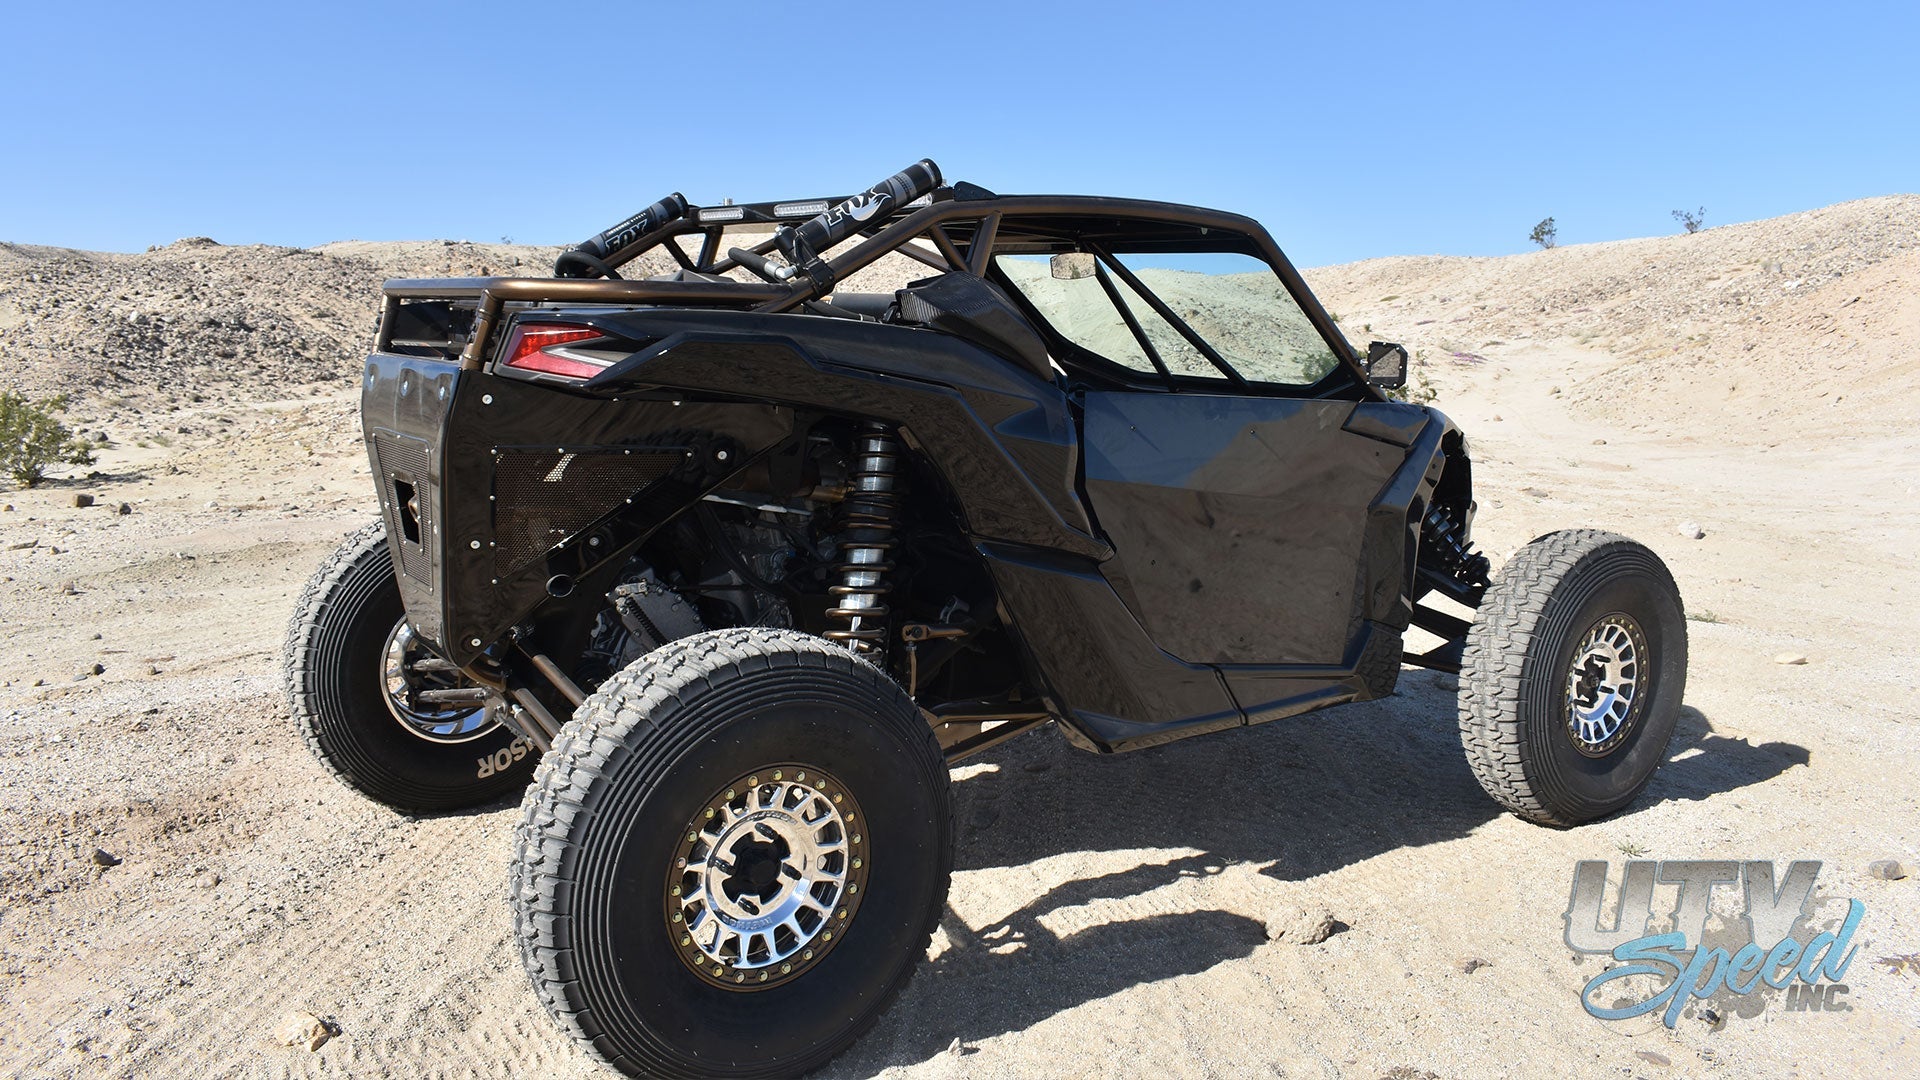 17-23 Can-Am Maverick X3 2DR Cage with Attached Rear Bumper by UTV Speed, Inc. Proudly made in the USA Customizable to your needs.